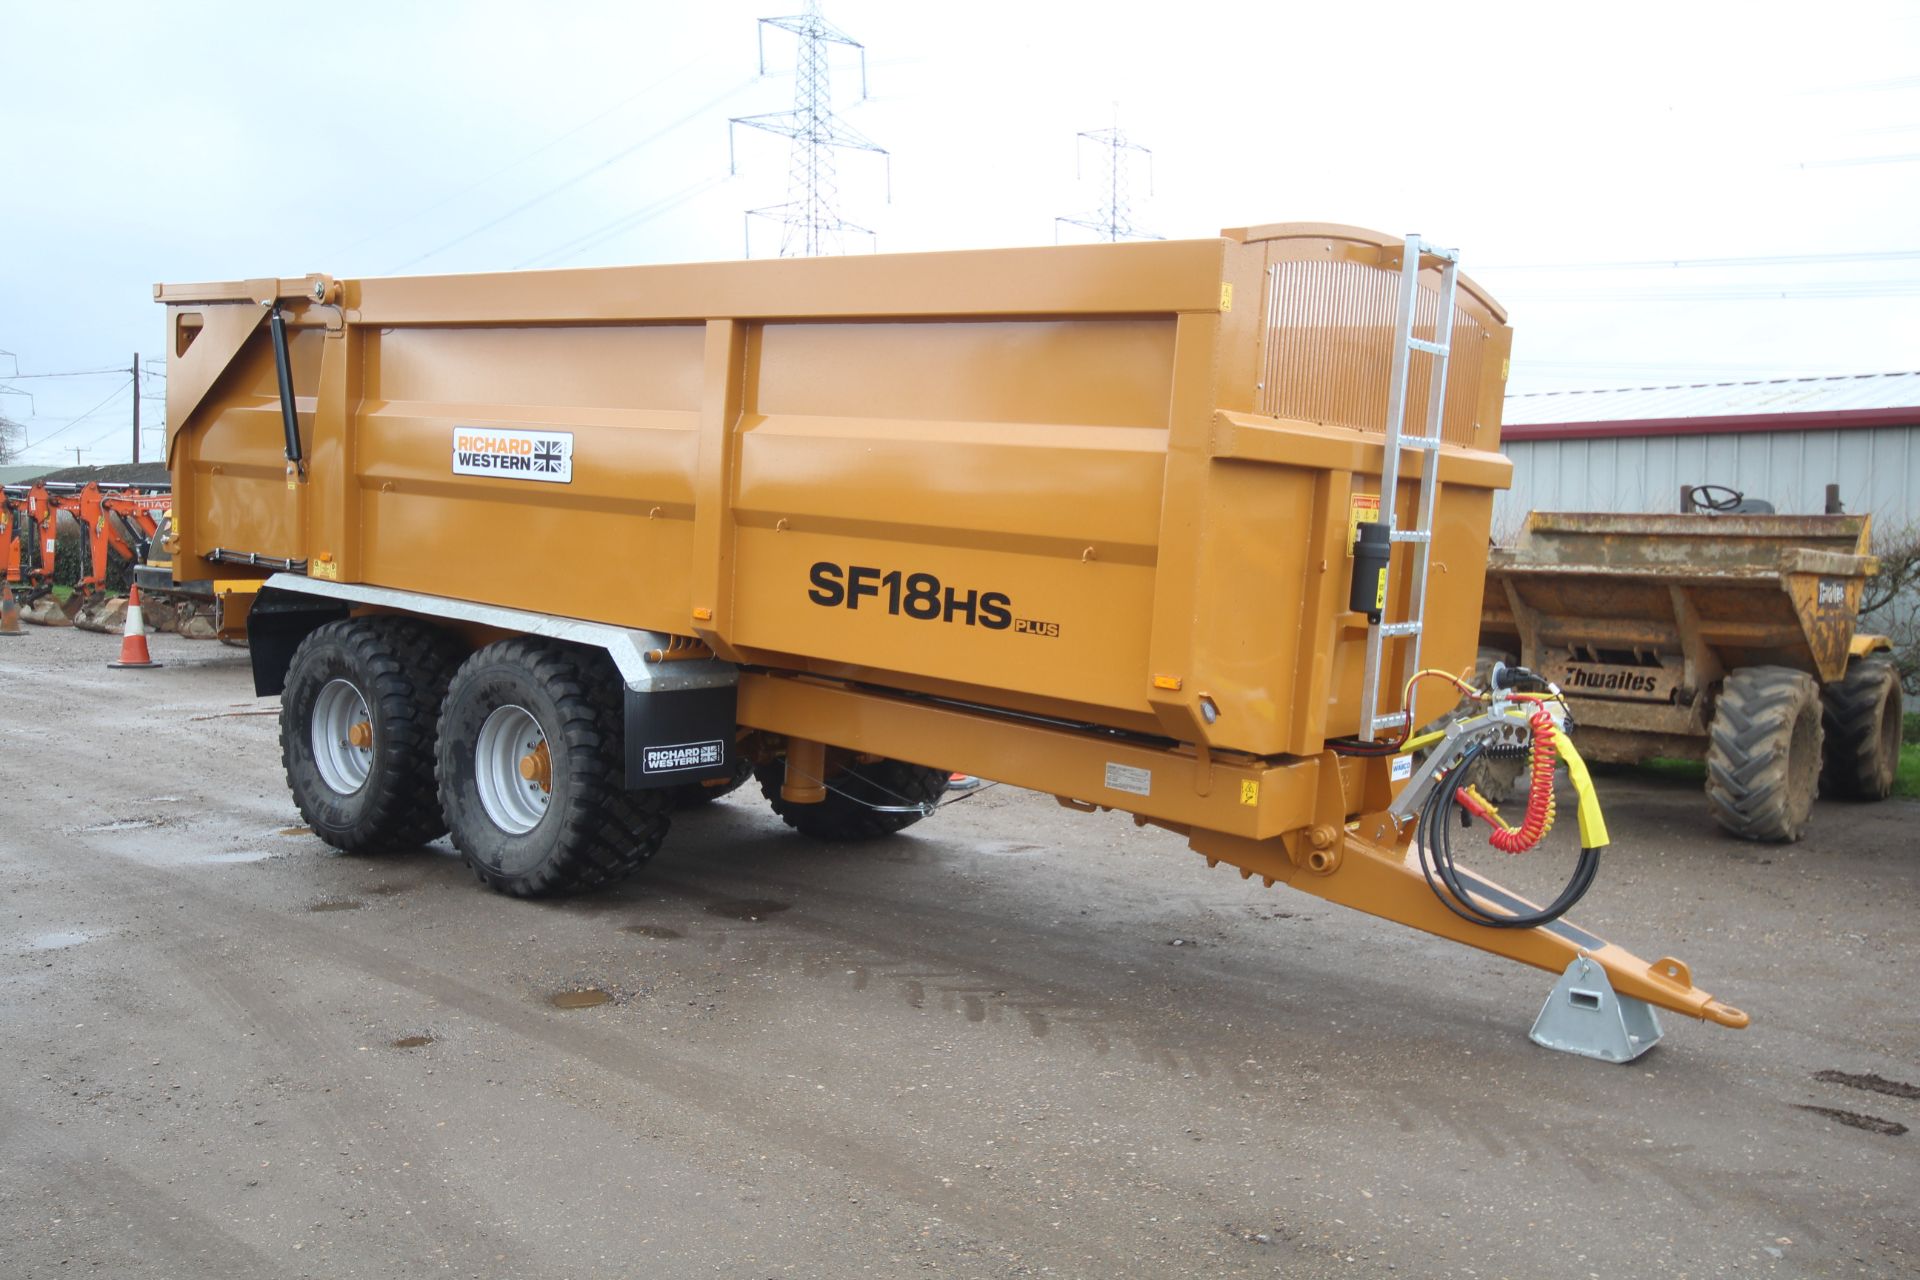 Richard Western SF18HS Plus 18T twin axle tipping trailer. With air brakes, sprung drawbar, - Image 50 of 50